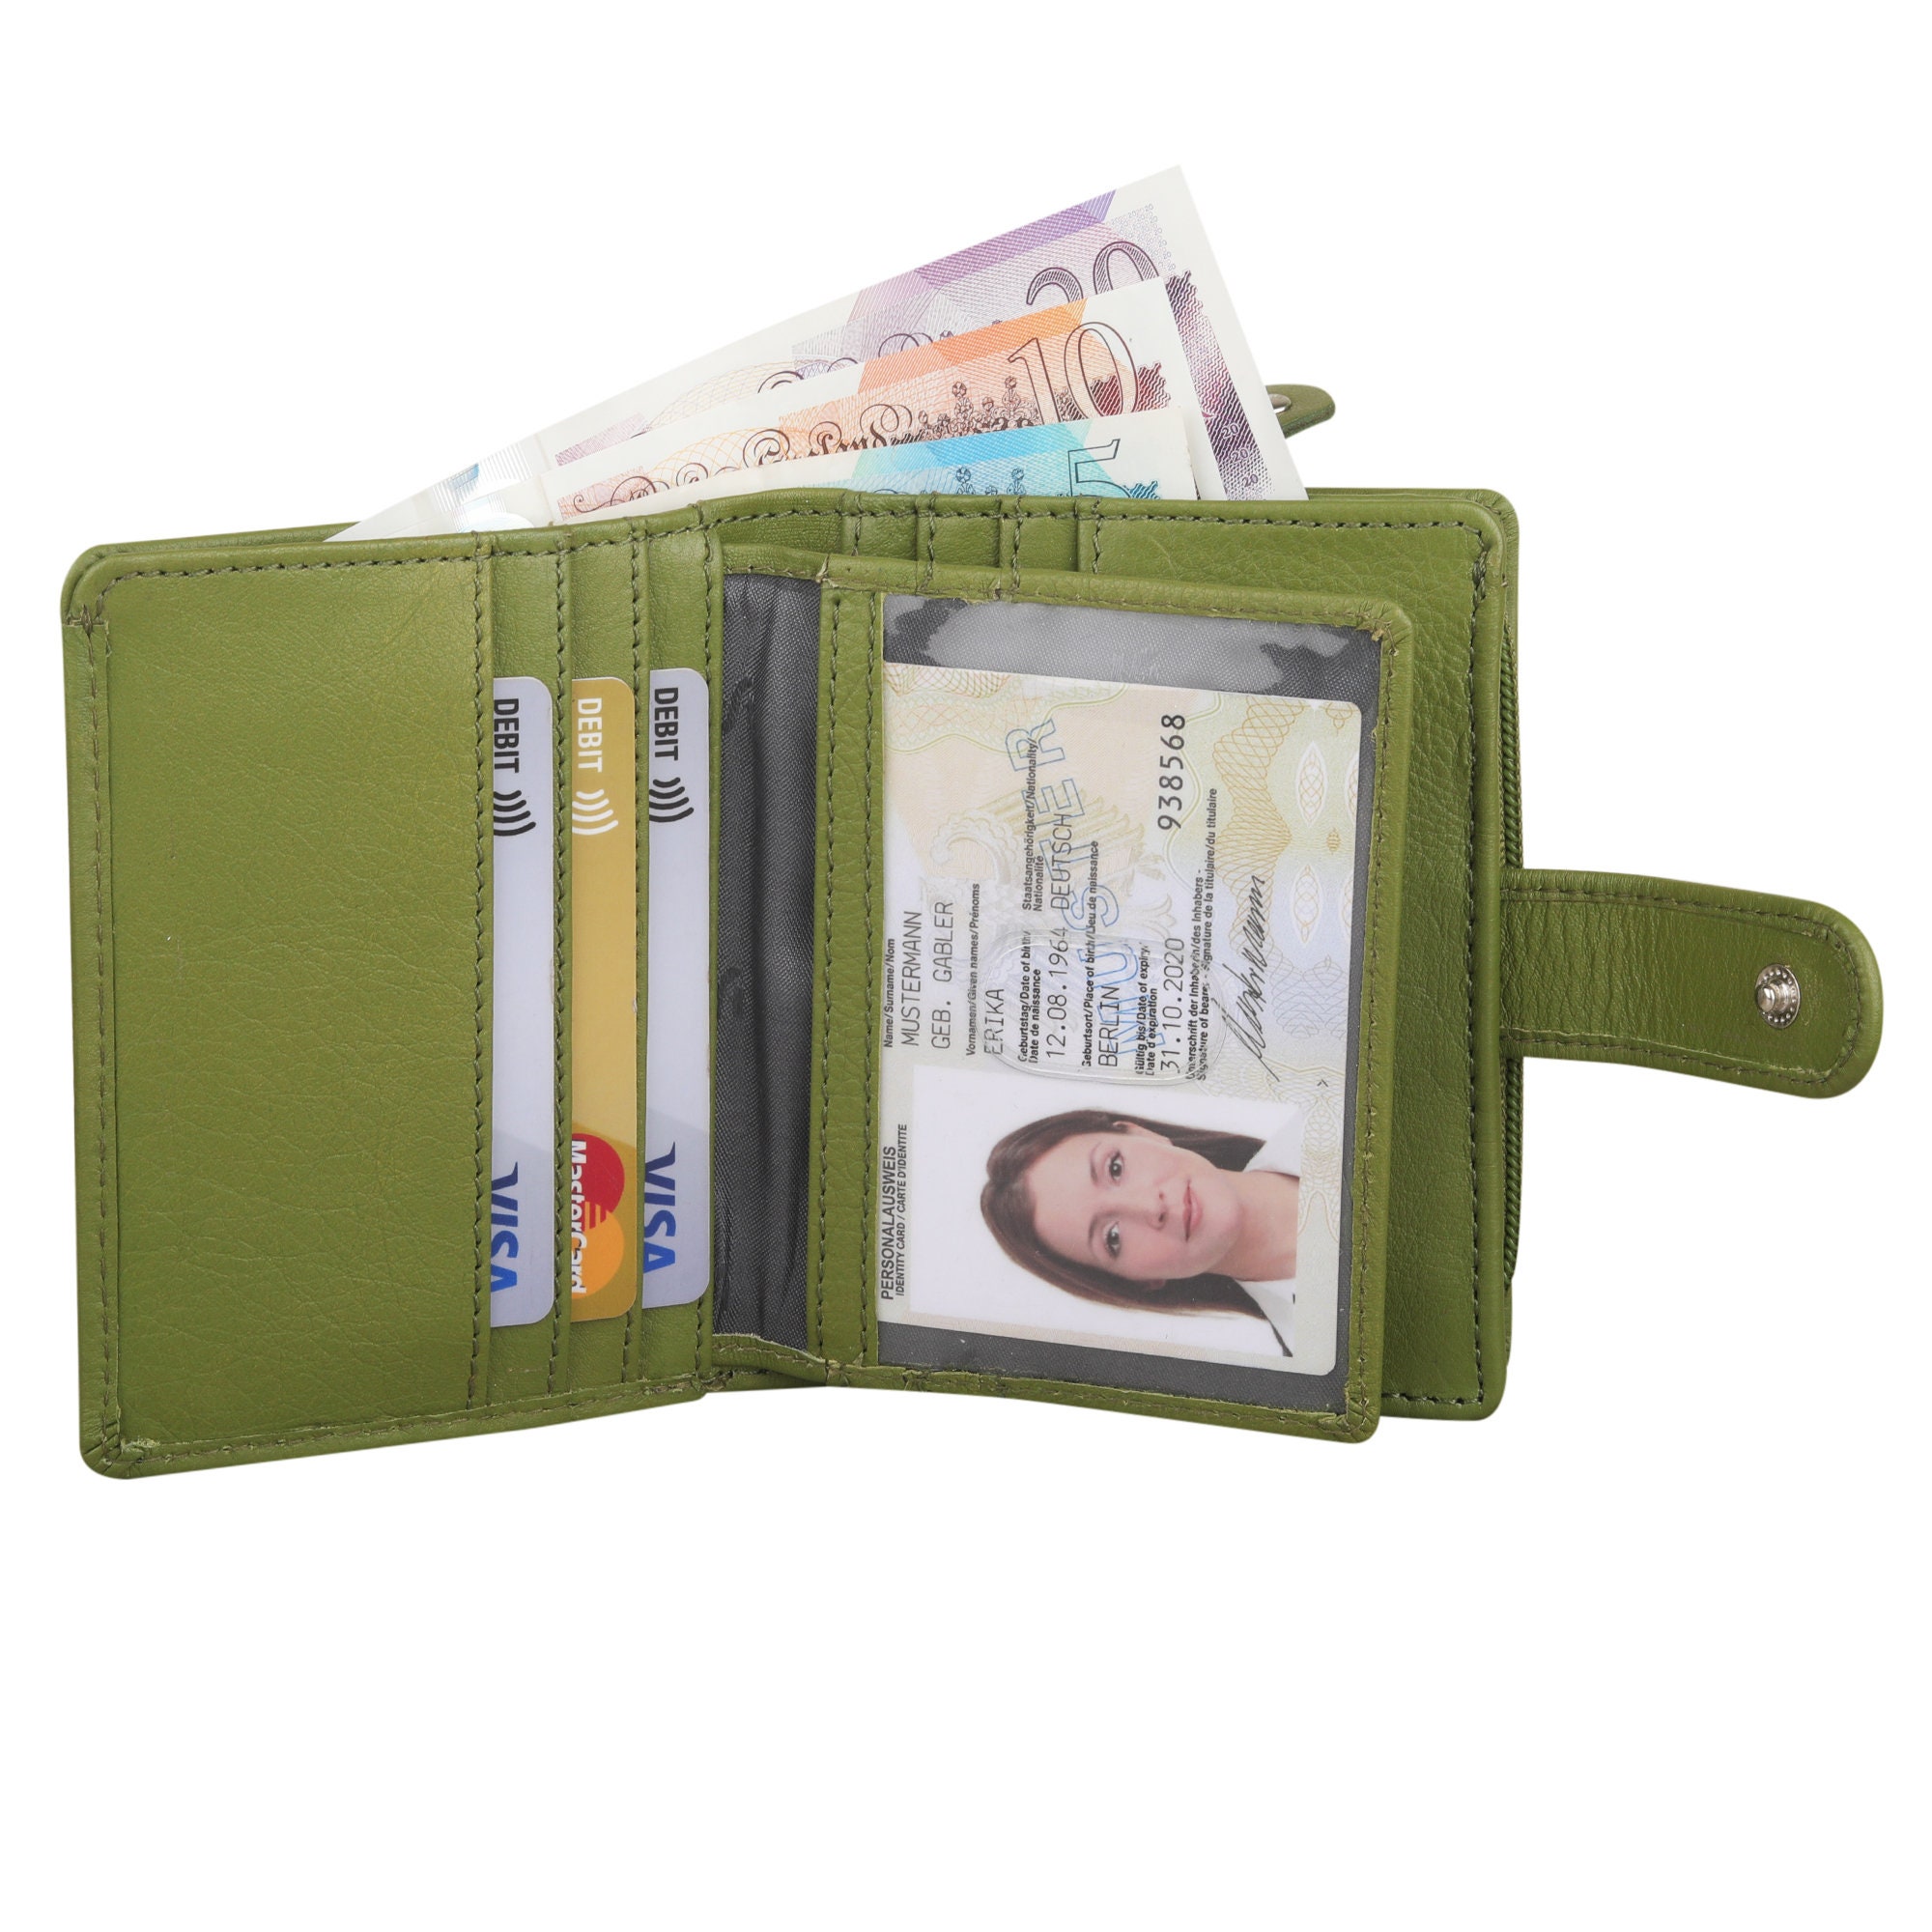 Leather Women's Wallets,Multi-Function Slim Bifold Zipper Clutch  Purse,Large Capacity Card Holder with RFID/Green